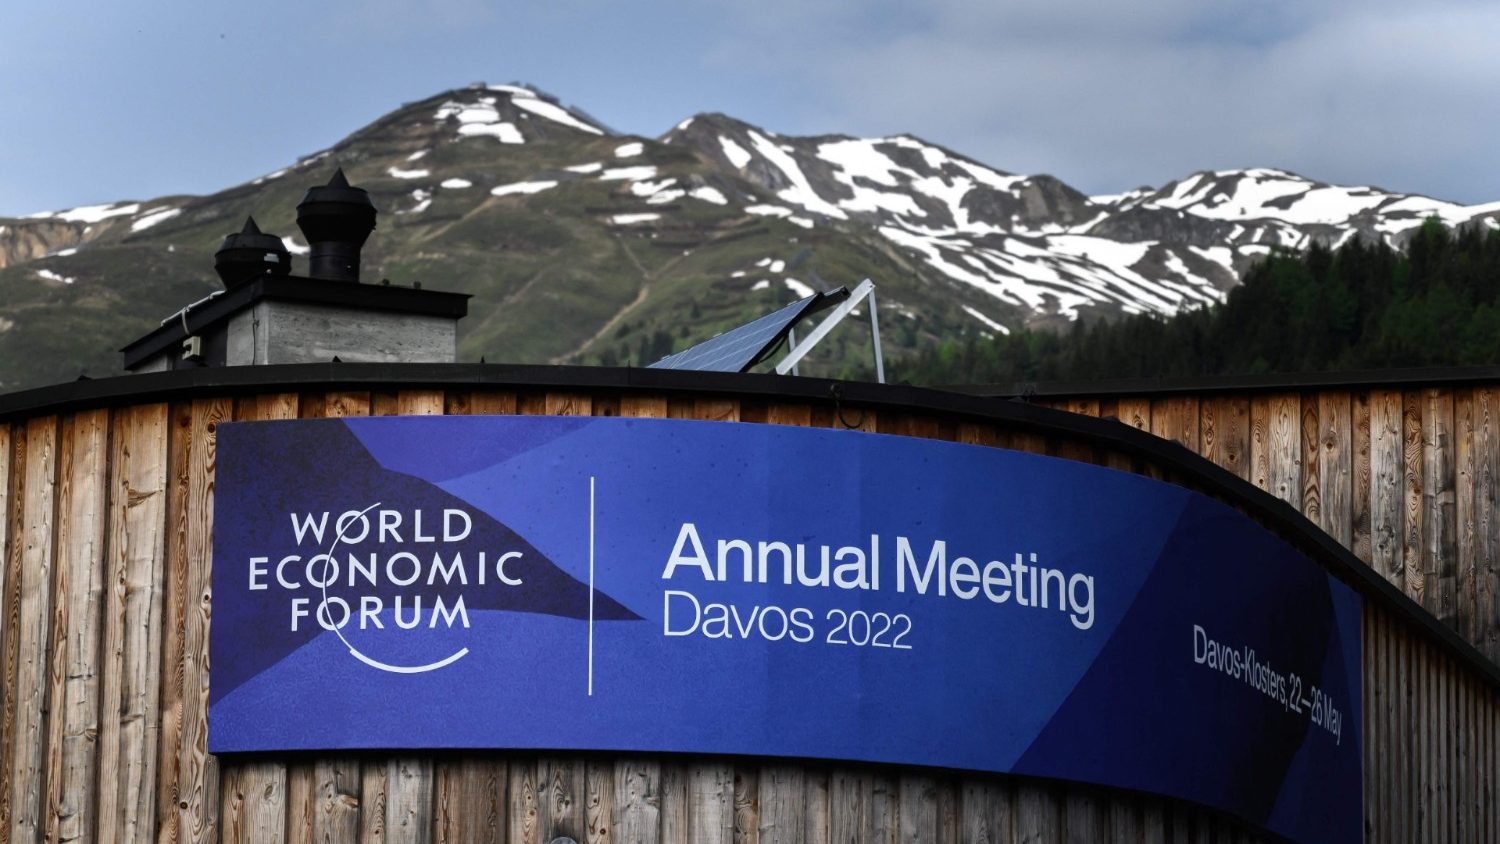 What is happening in Davos with the WEF